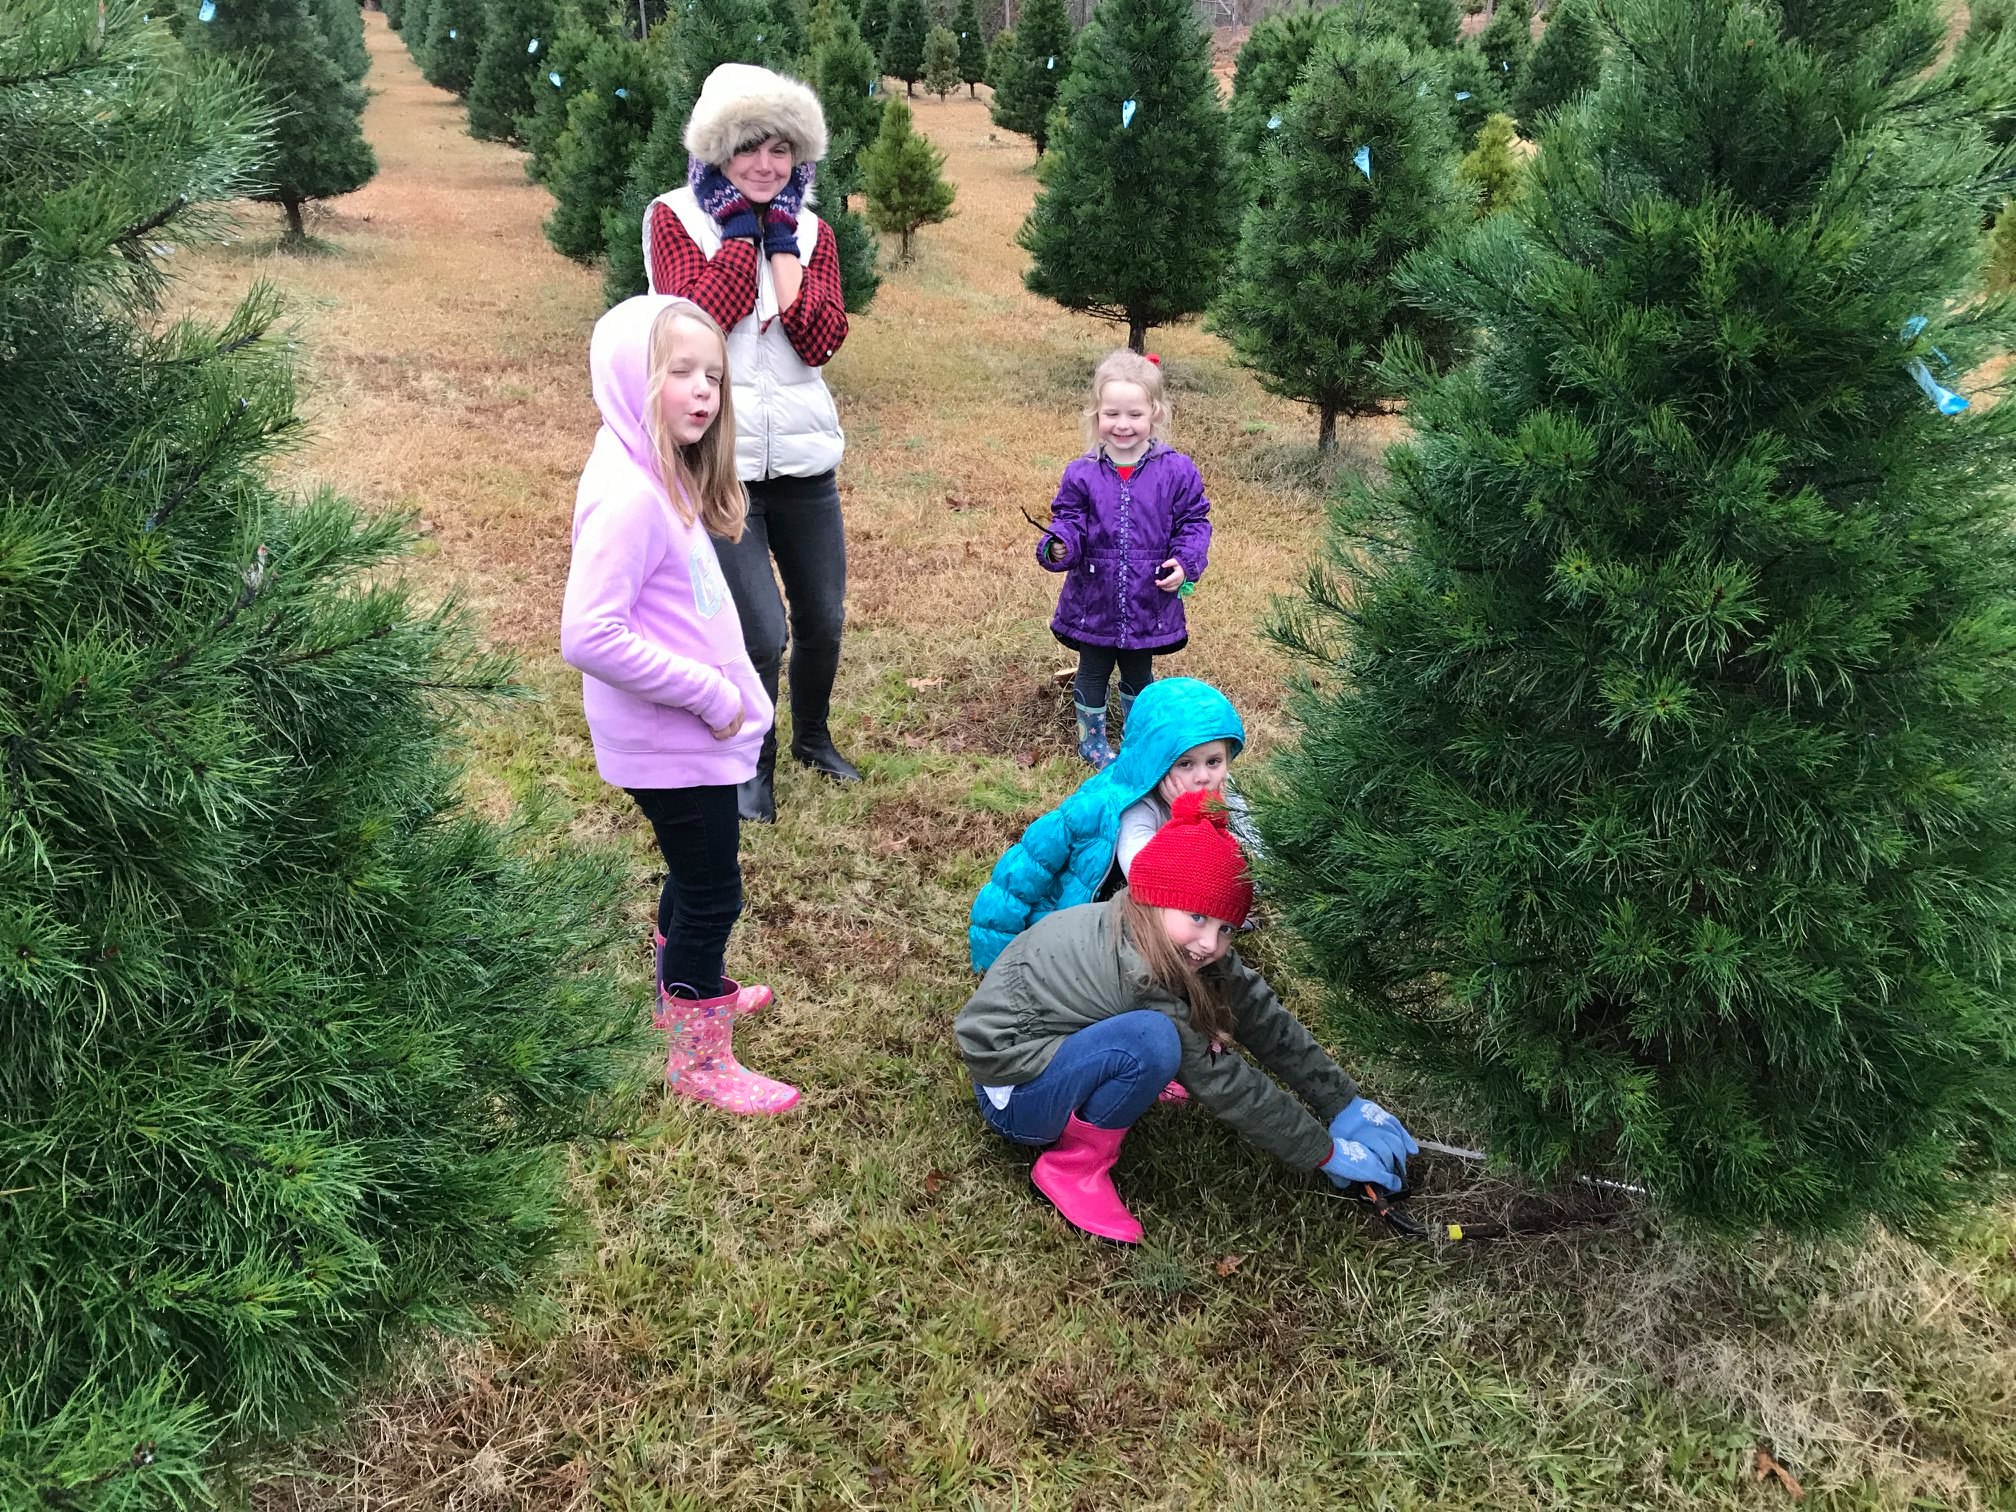 Need a holiday tree? Here are 8 places in + near Birmingham to check out